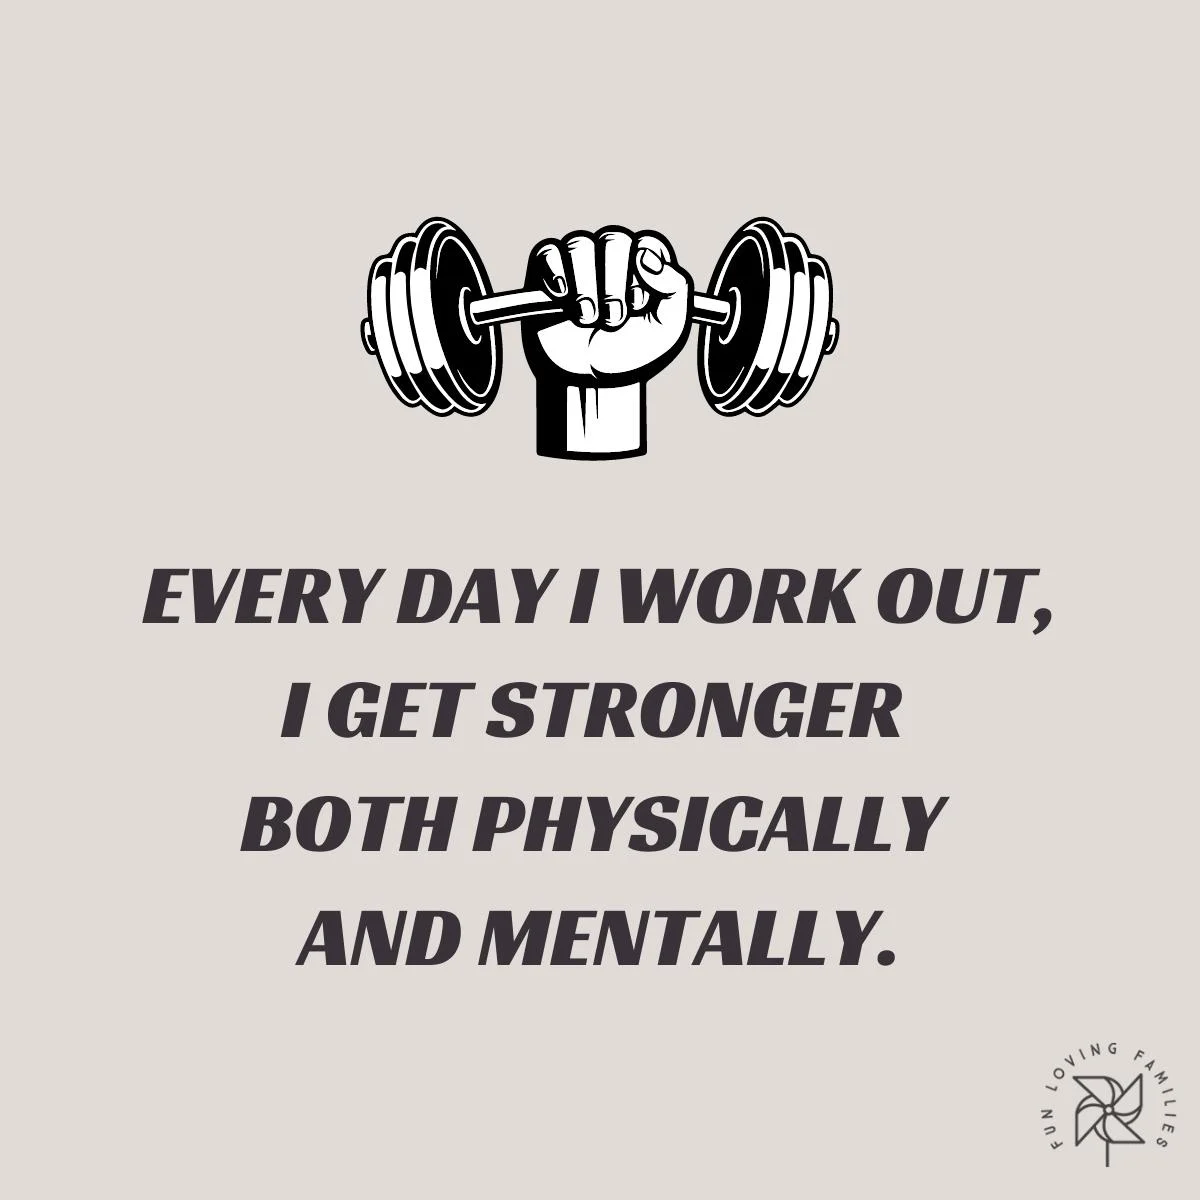 Every day I work out, I get stronger both physically and mentally affirmation